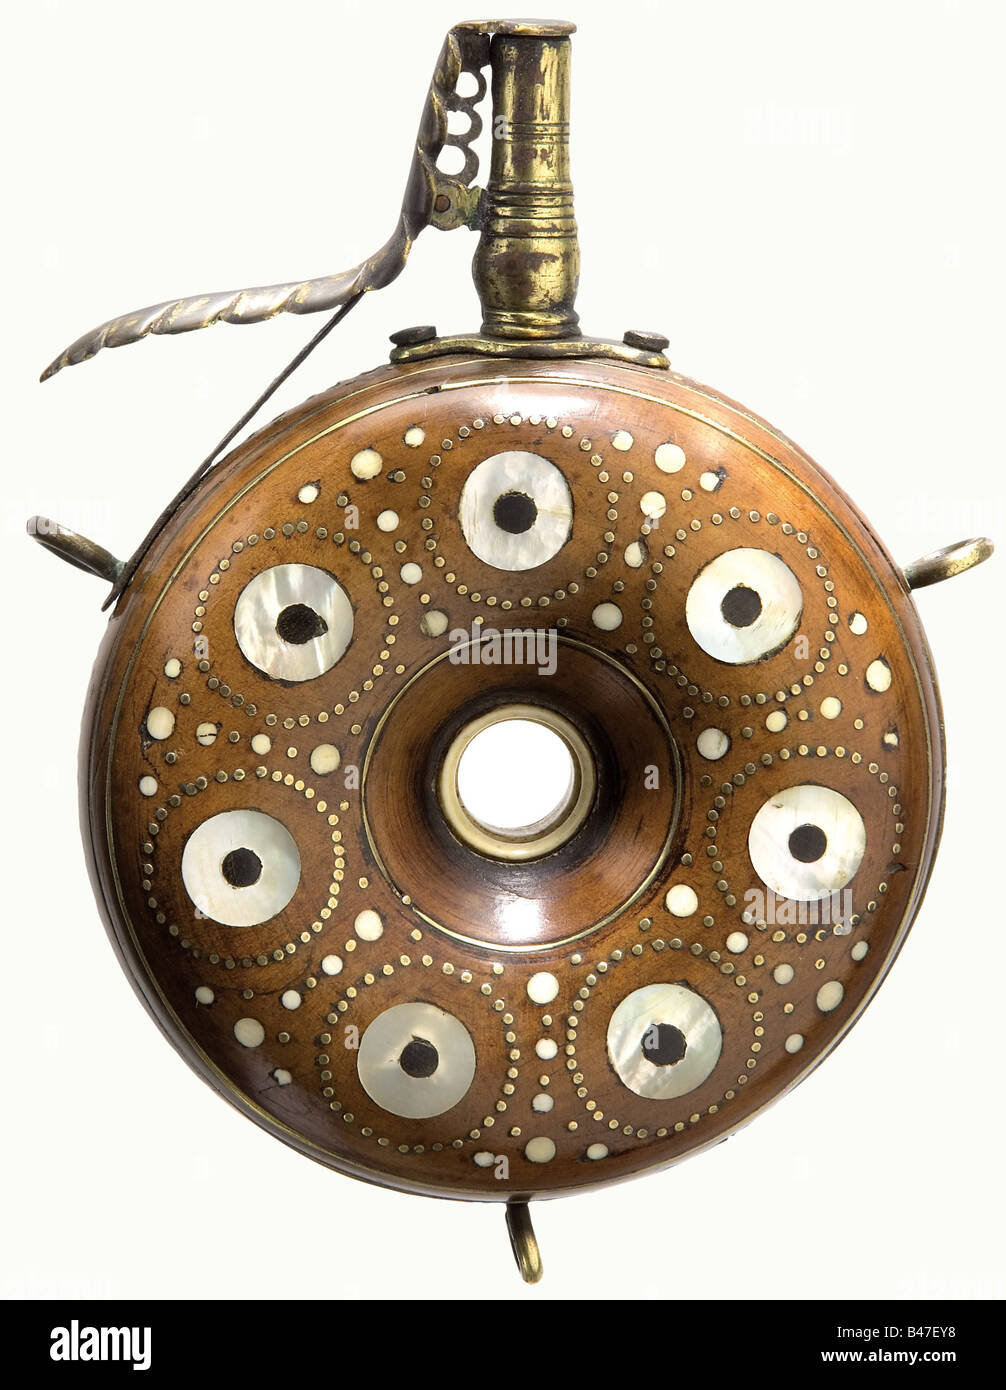 A German priming flask, circa 1600. Ring shaped fruitwood body richly  inlaid with brass, mother-of-pearl, bone, and black horn. Spring-loaded  fire-gilded brass nozzle. Three carrying rings. Size 16.5 cm. historic,  historical, 17th